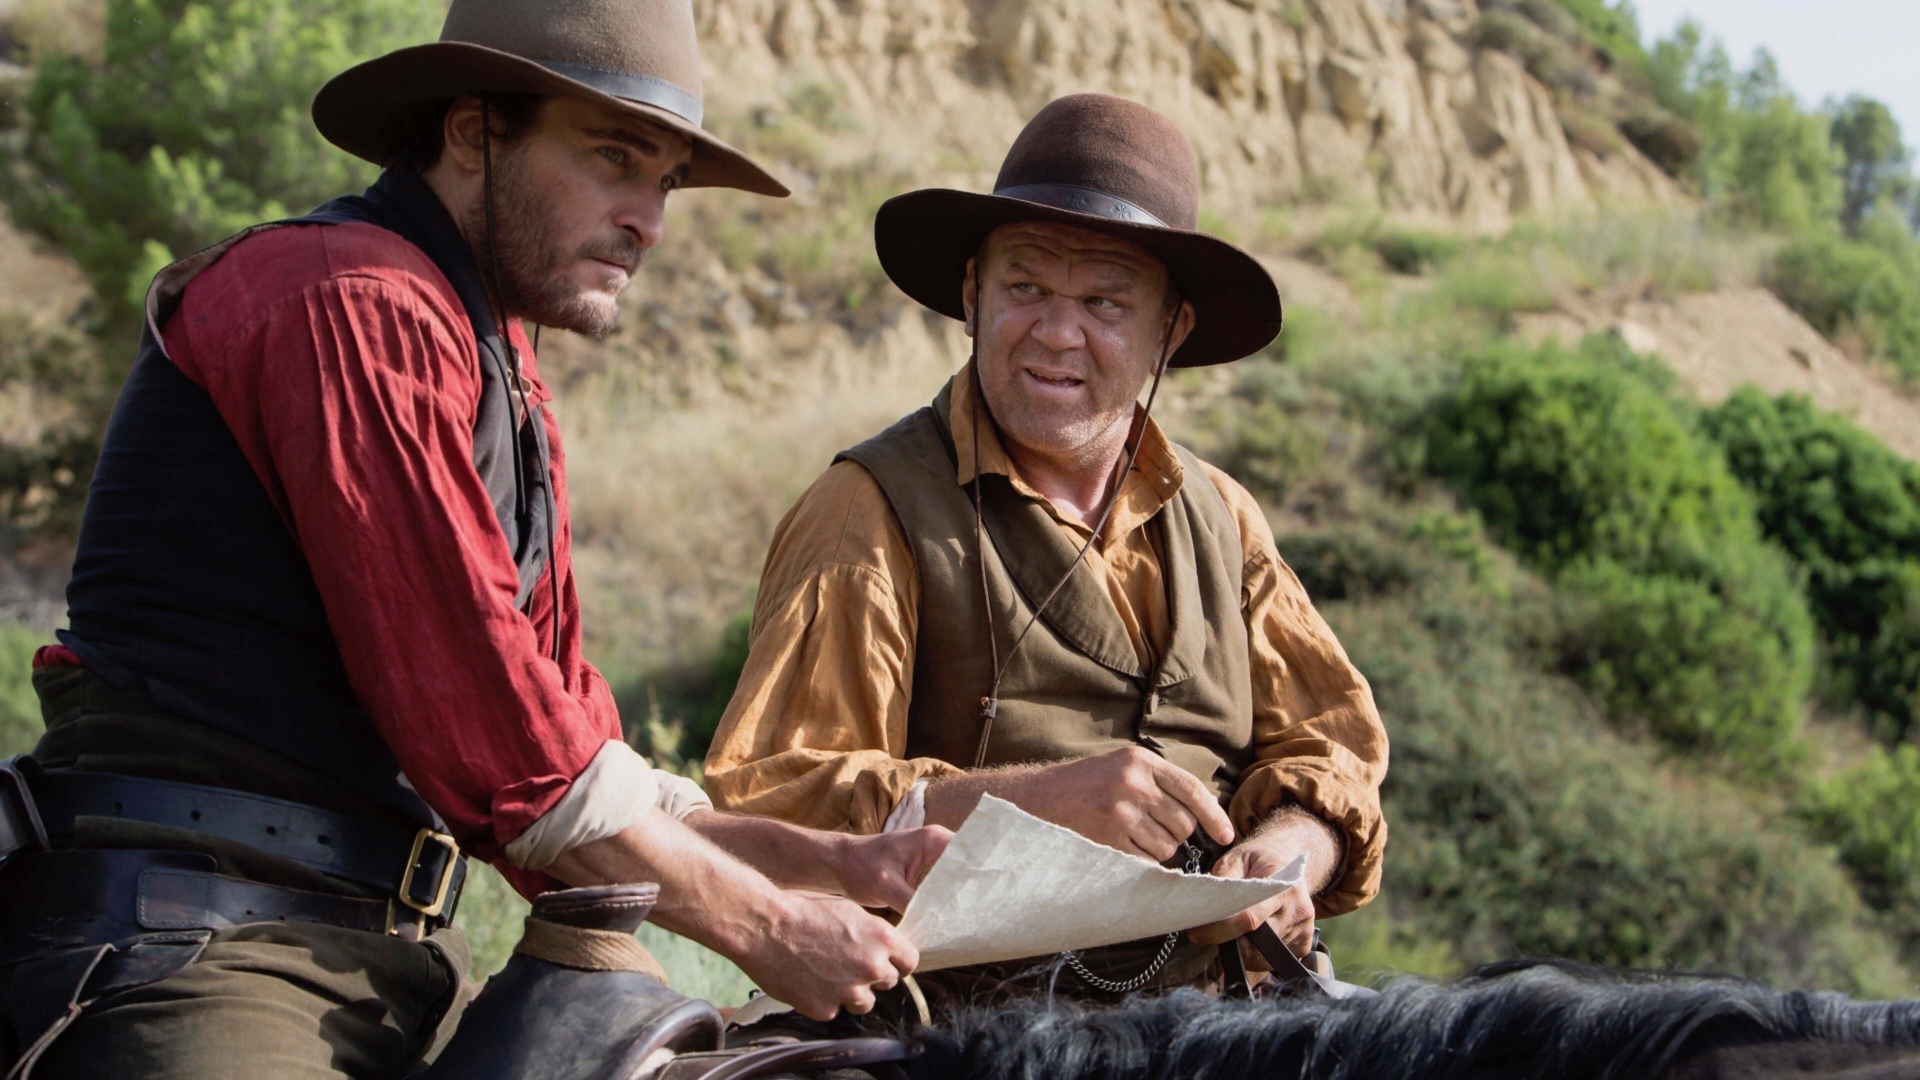 The Sisters Brothers (The Sisters Brothers)